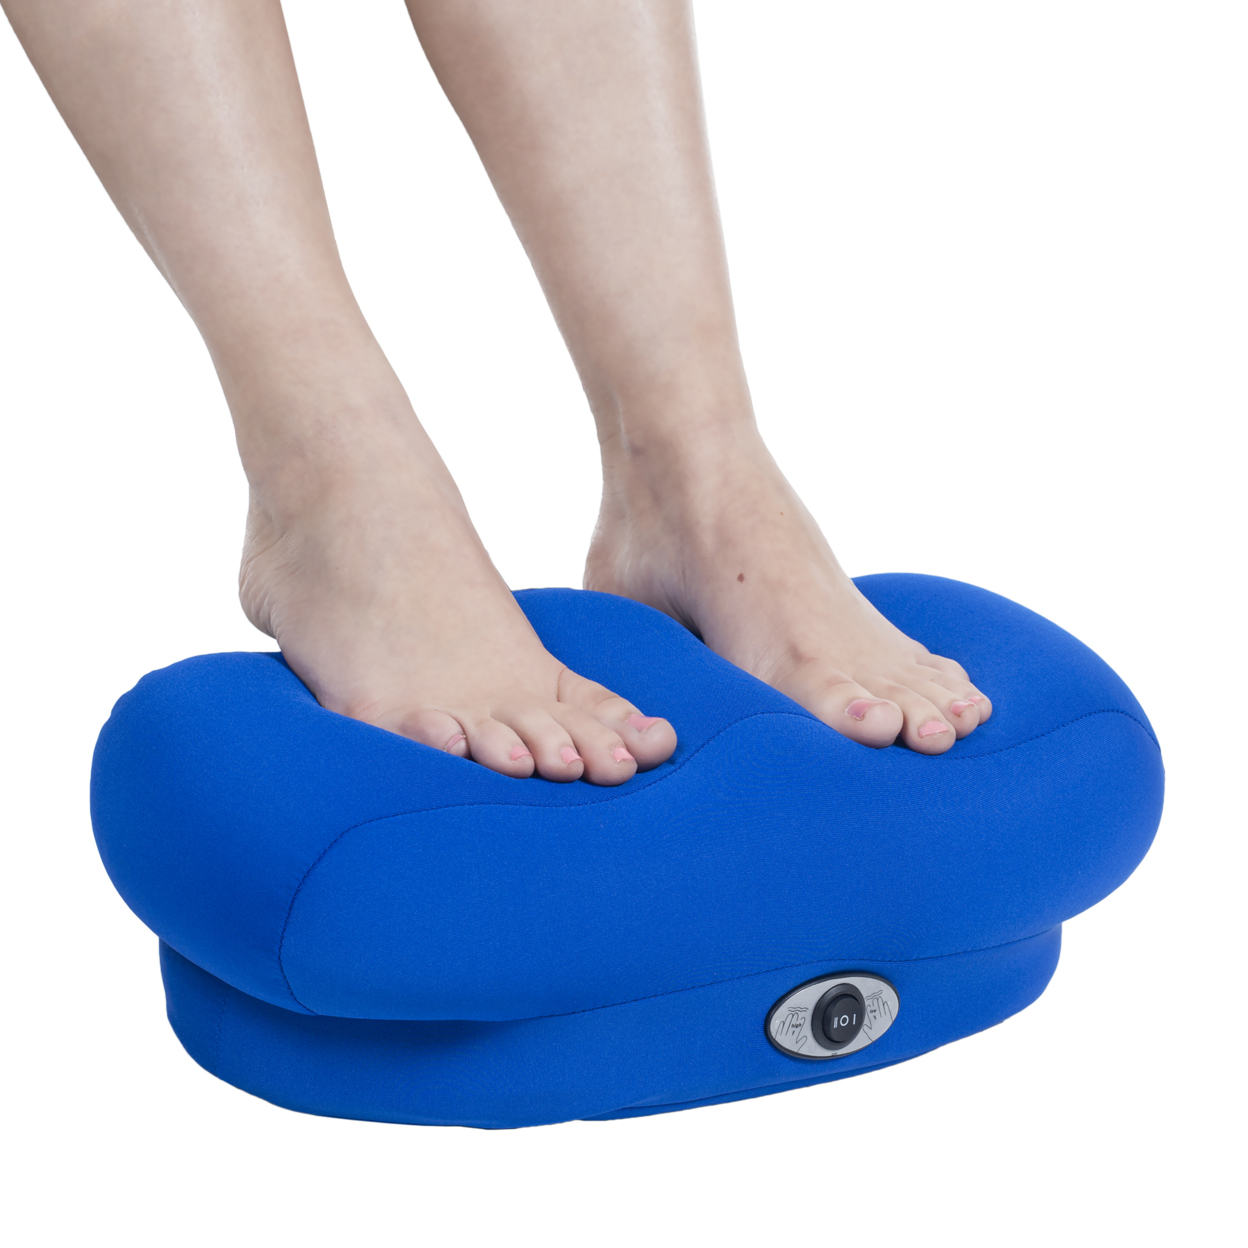 Remedy Vibrating Foot Massager - Micro-Bead Squishy Soft Battery Operated Helps Tired Feet